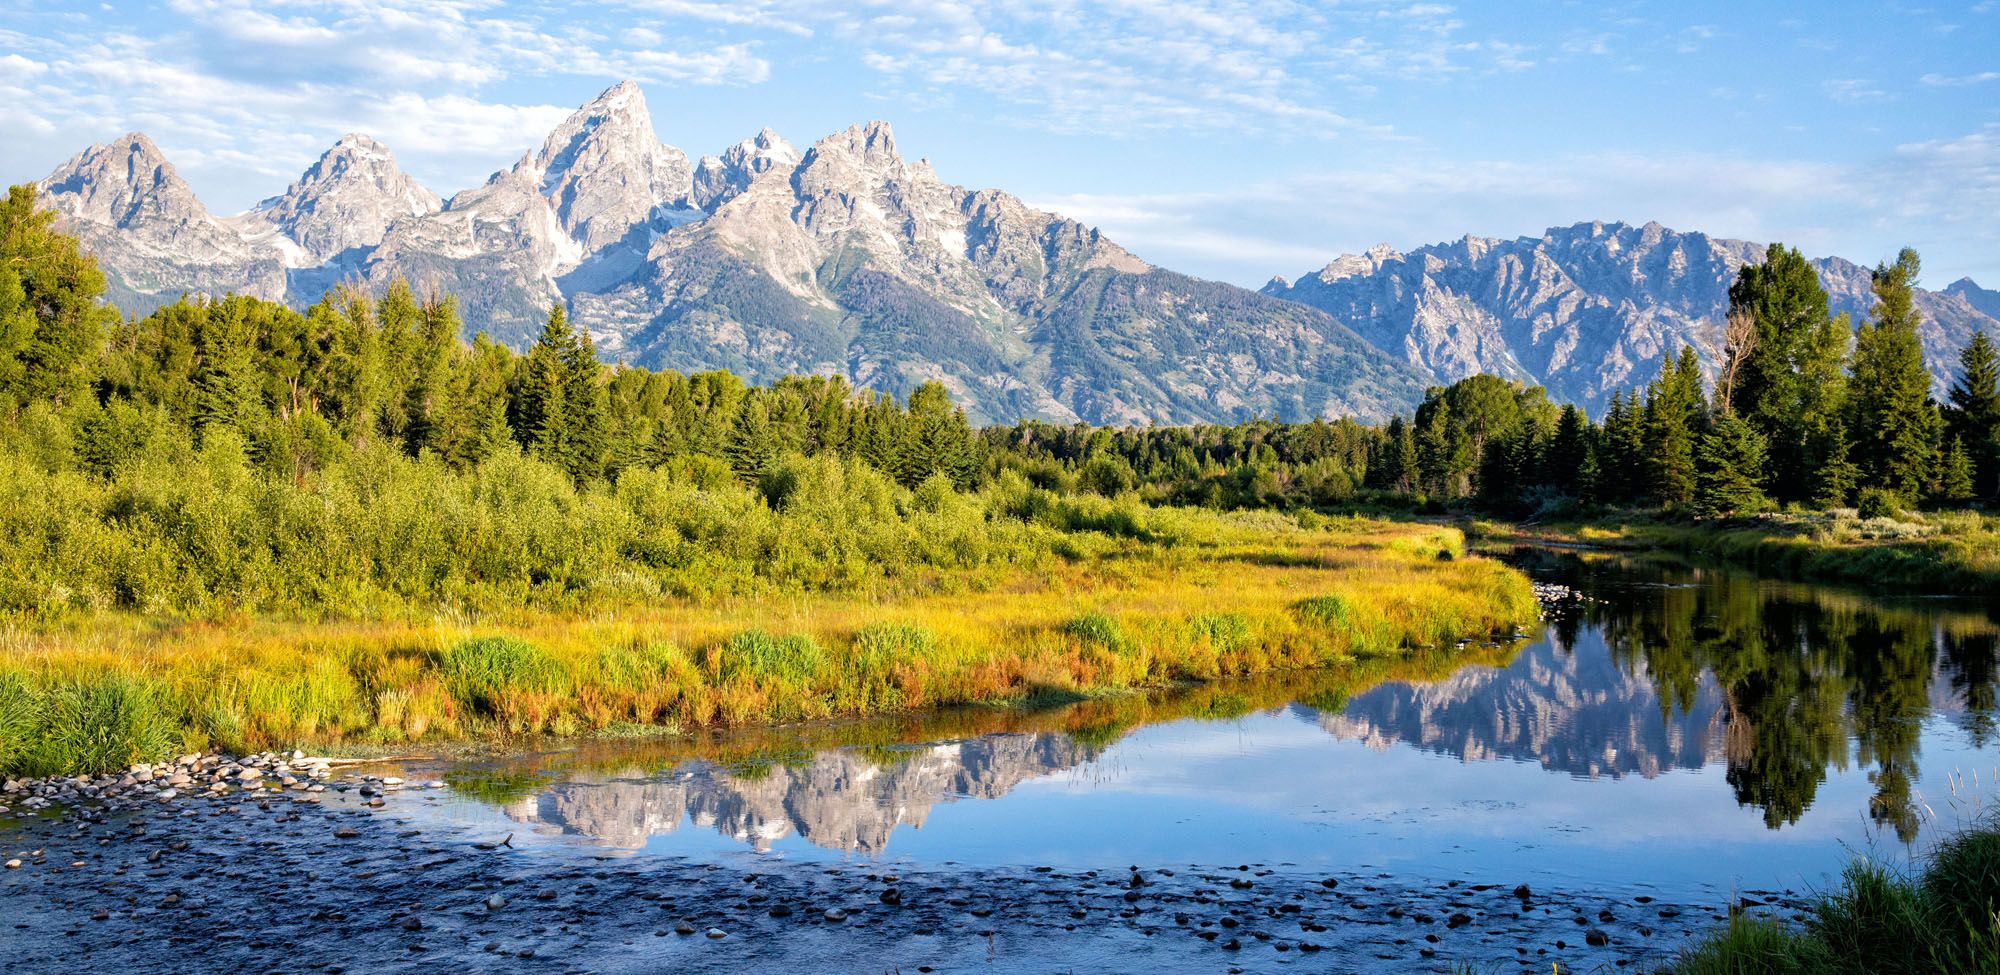 Featured image for “15 Best Things to Do in Grand Teton National Park”